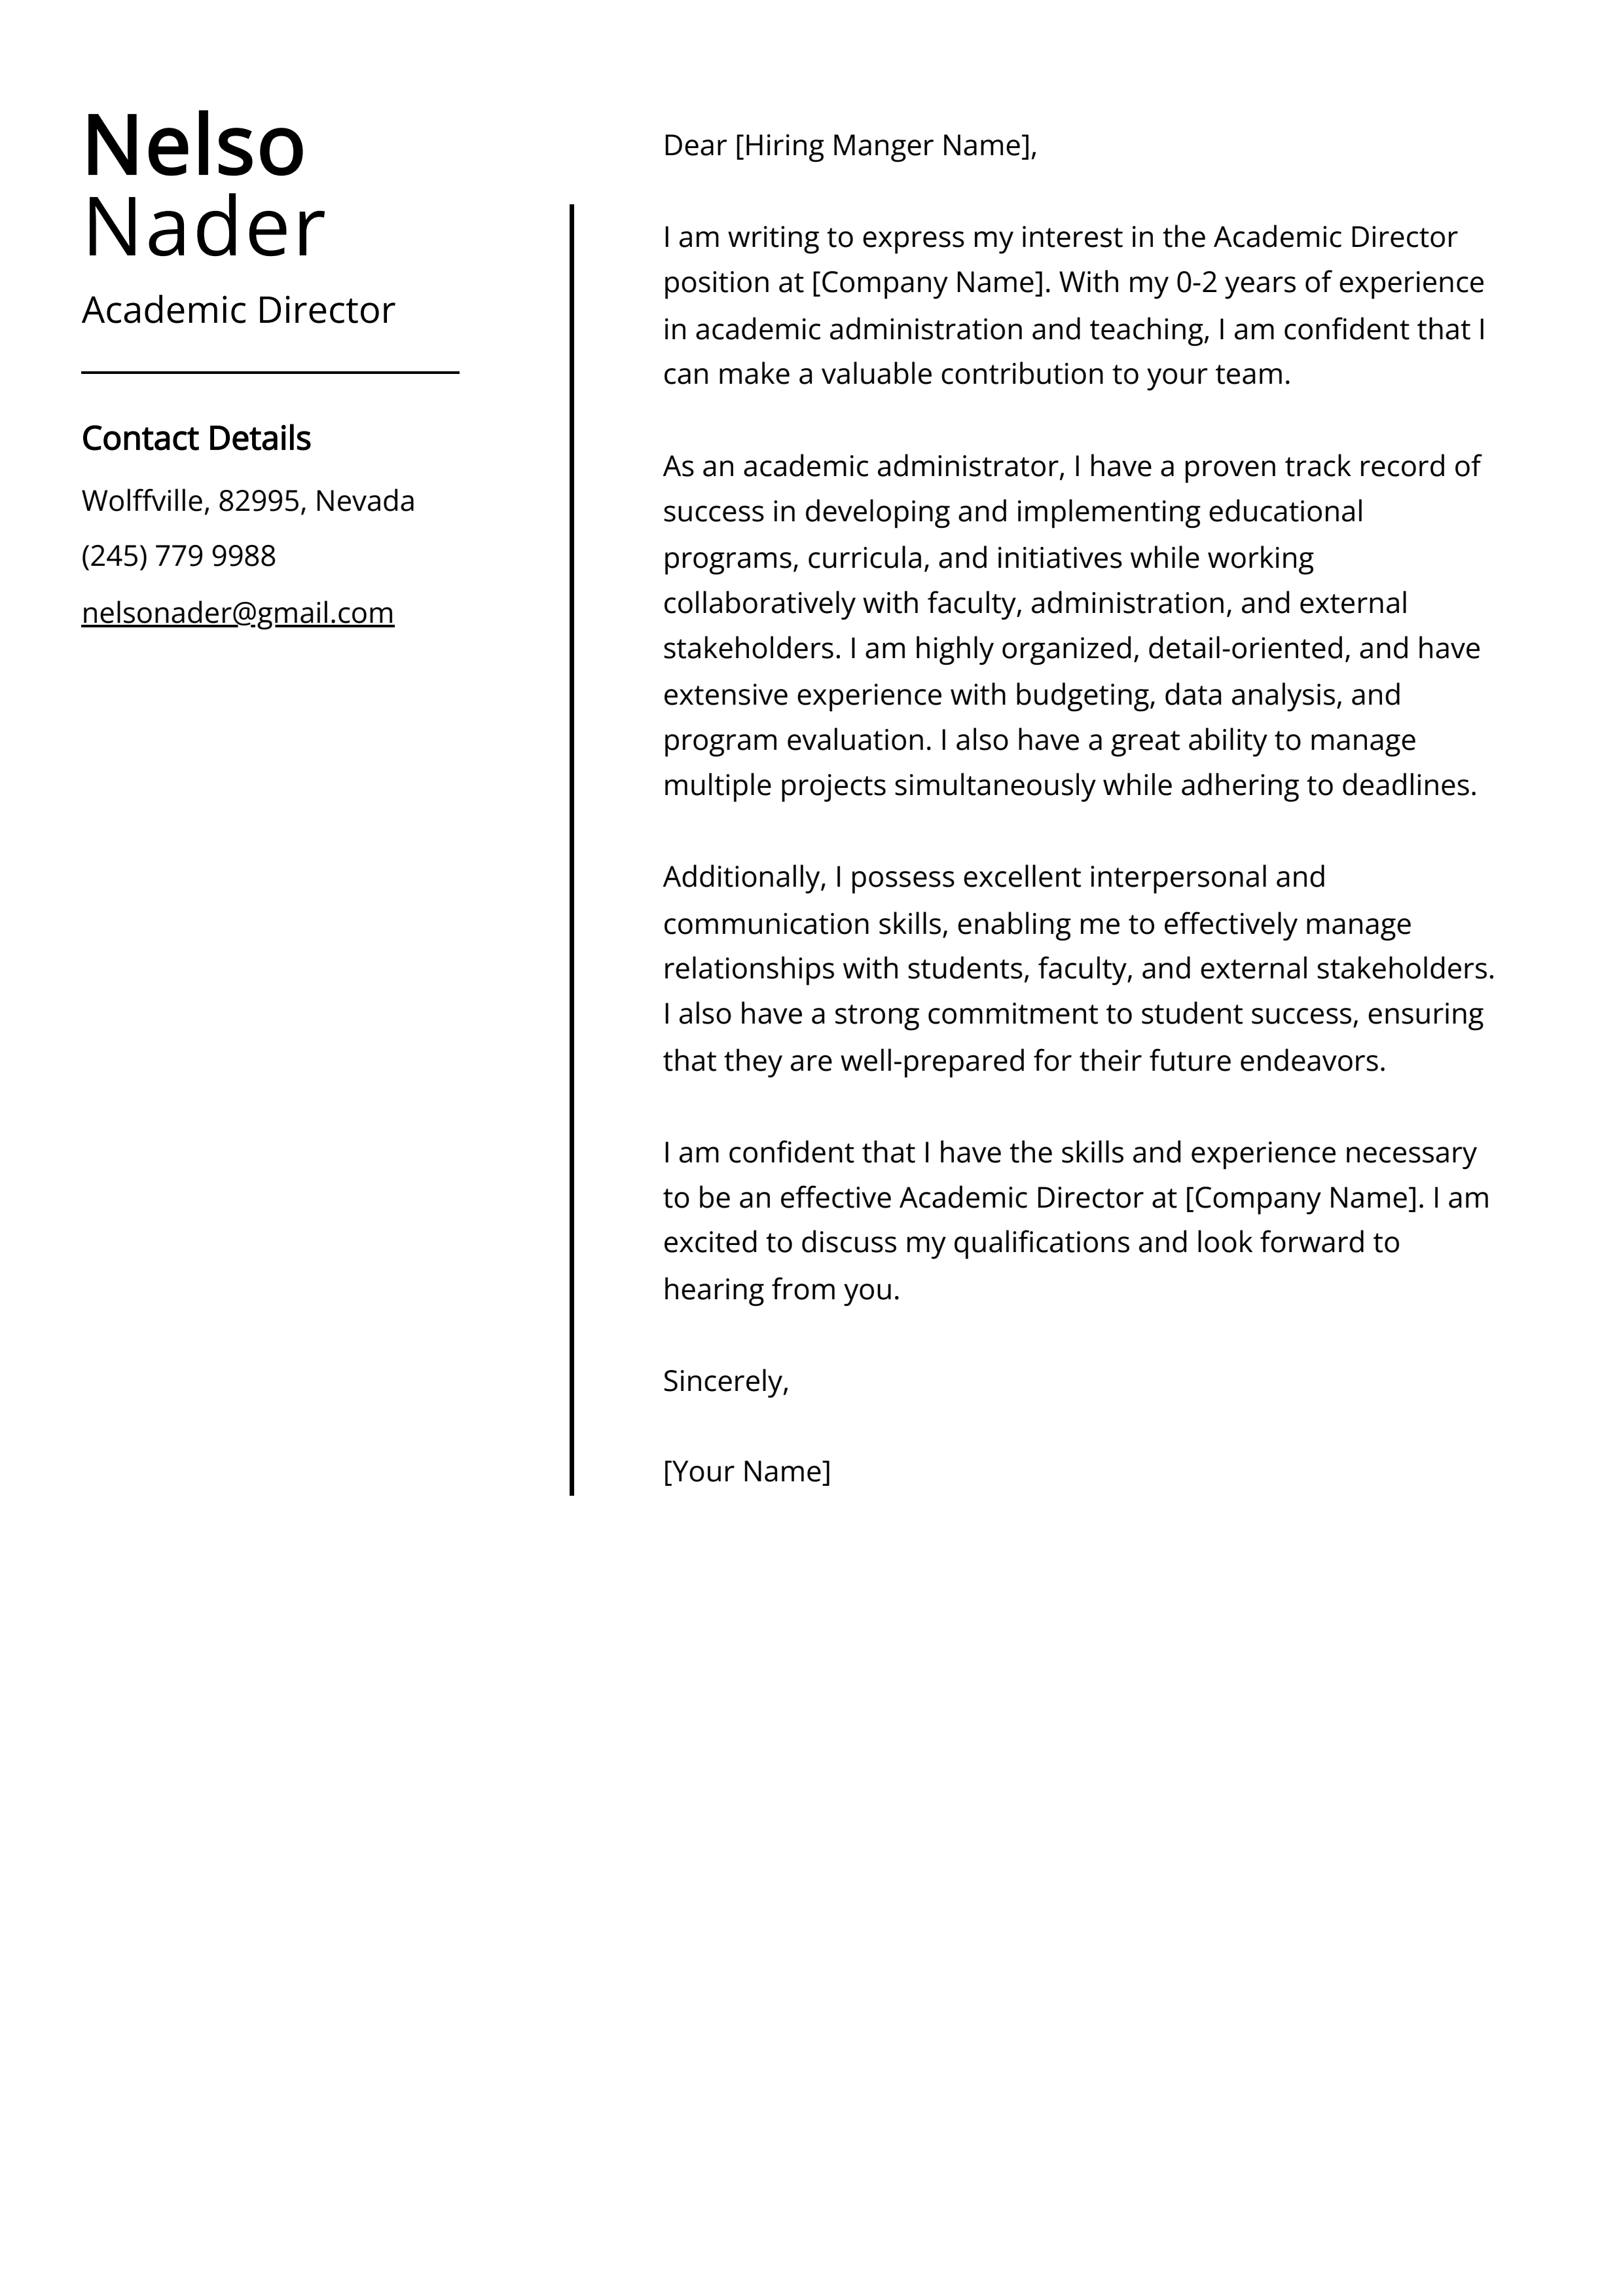 Academic Director Cover Letter Example